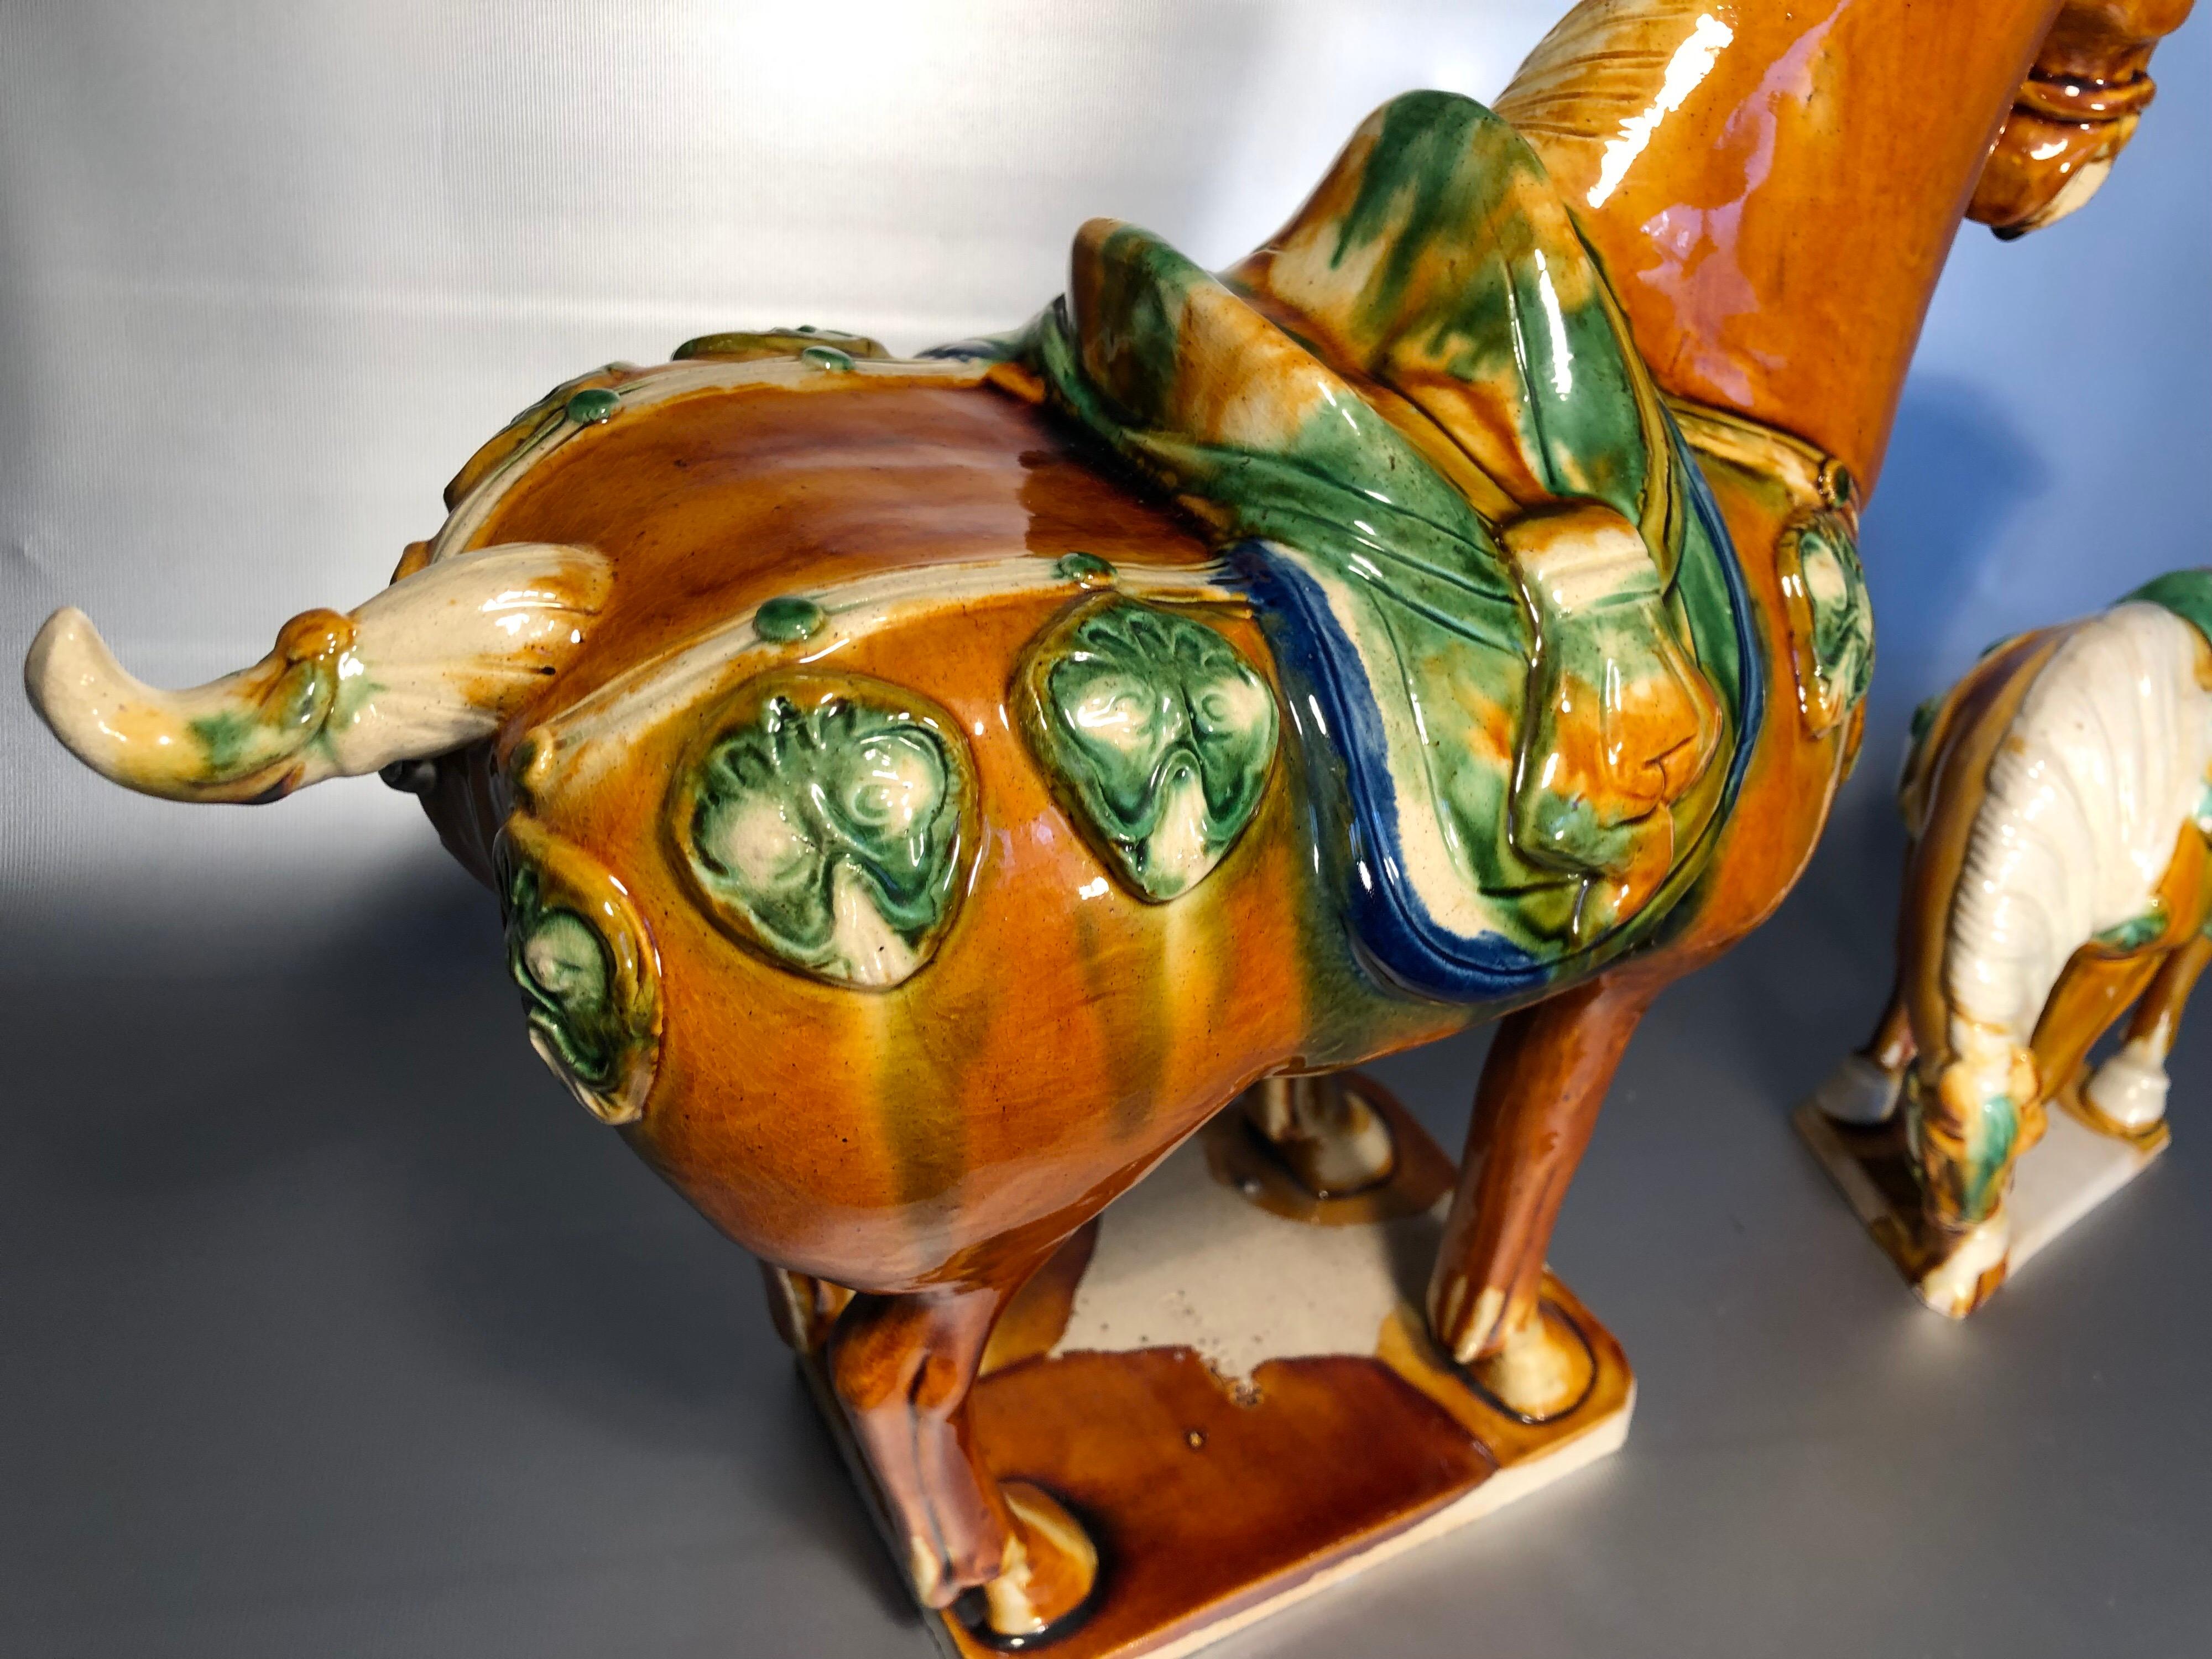 20th Century Two Tang Sancai Glazed Ceramic Horses, Stamped